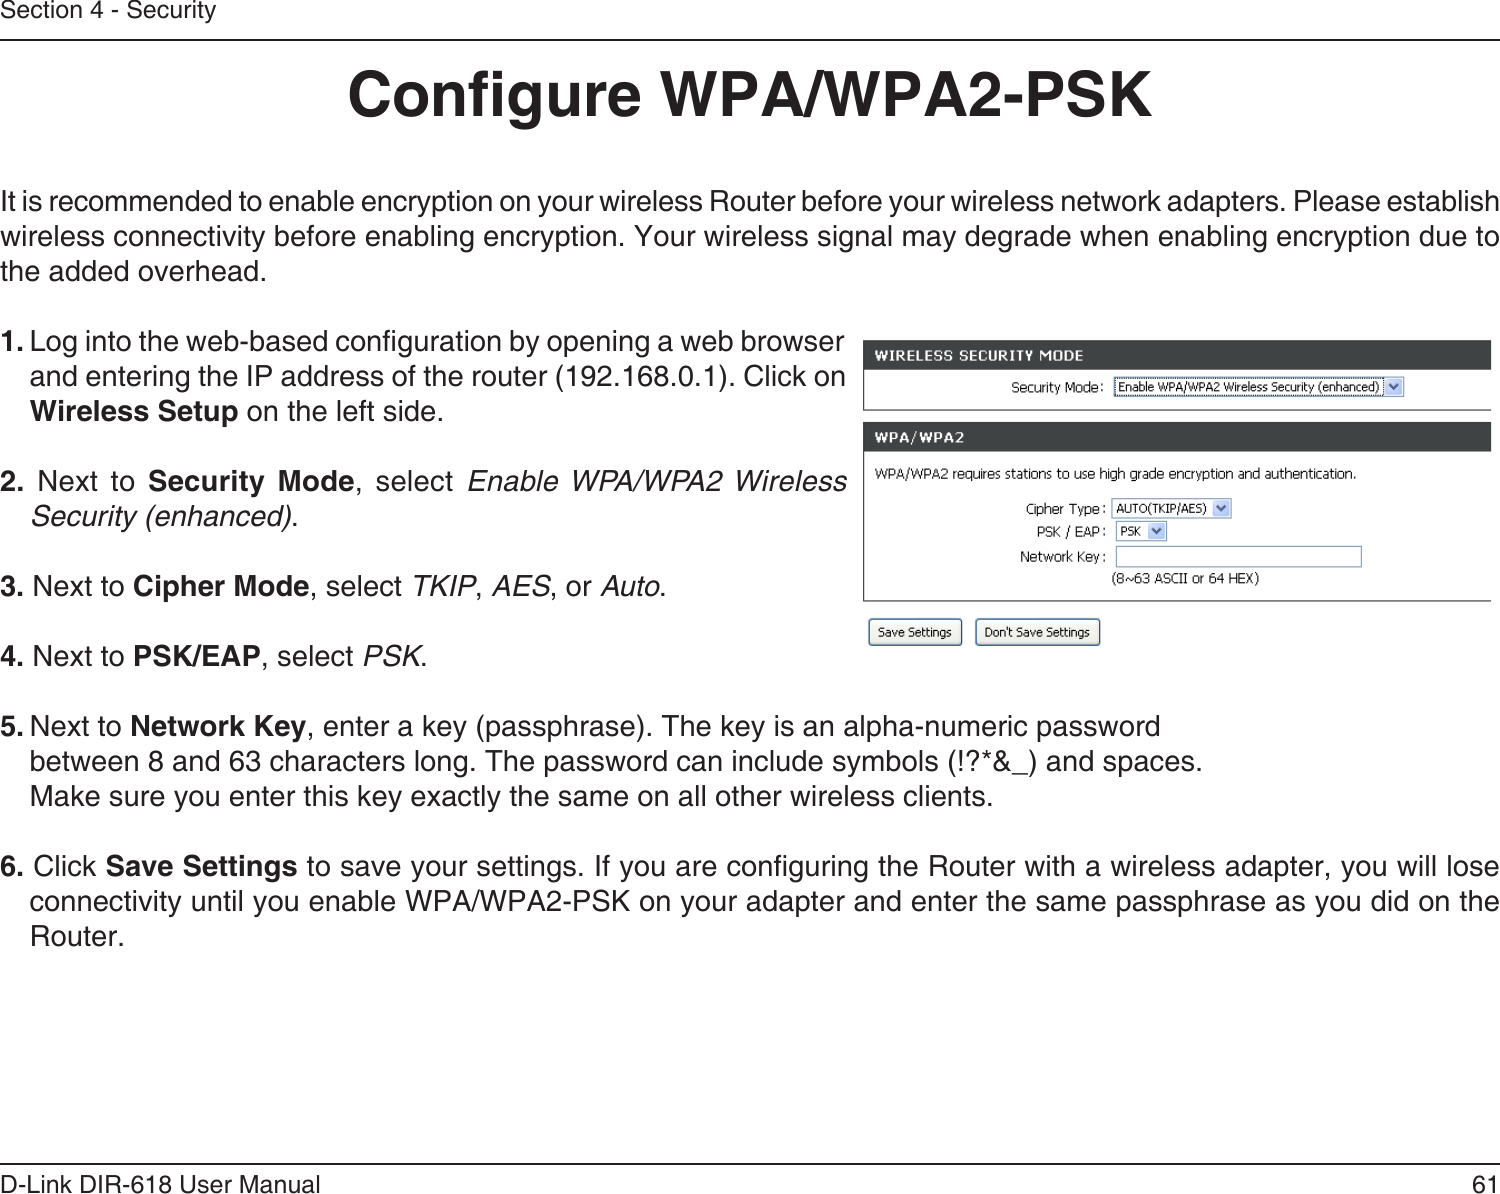 61D-Link DIR-618 User ManualSection 4 - SecurityCongure WPA/WPA2-PSKIt is recommended to enable encryption on your wireless Router before your wireless network adapters. Please establishwireless connectivity before enabling encryption. Your wireless signal may degrade when enabling encryption due tothe added overhead.1. Log into the web-based conguration by opening a web browser and entering the IP address of the router (192.168.0.1). Click onWireless Setup on the left side.2. Next to Security Mode, select Enable WPA/WPA2 WirelessSecurity (enhanced).3. Next to Cipher Mode, select TKIP, AES, or Auto.4. Next to PSK/EAP, select PSK.5. Next to Network Key, enter a key (passphrase). The key is an alpha-numeric passwordbetween 8 and 63 characters long. The password can include symbols (!?*&amp;_) and spaces.Make sure you enter this key exactly the same on all other wireless clients.6. Click Save Settings to save your settings. If you are conguring the Router with a wireless adapter, you will lose connectivity until you enable WPA/WPA2-PSK on your adapter and enter the same passphrase as you did on the Router.